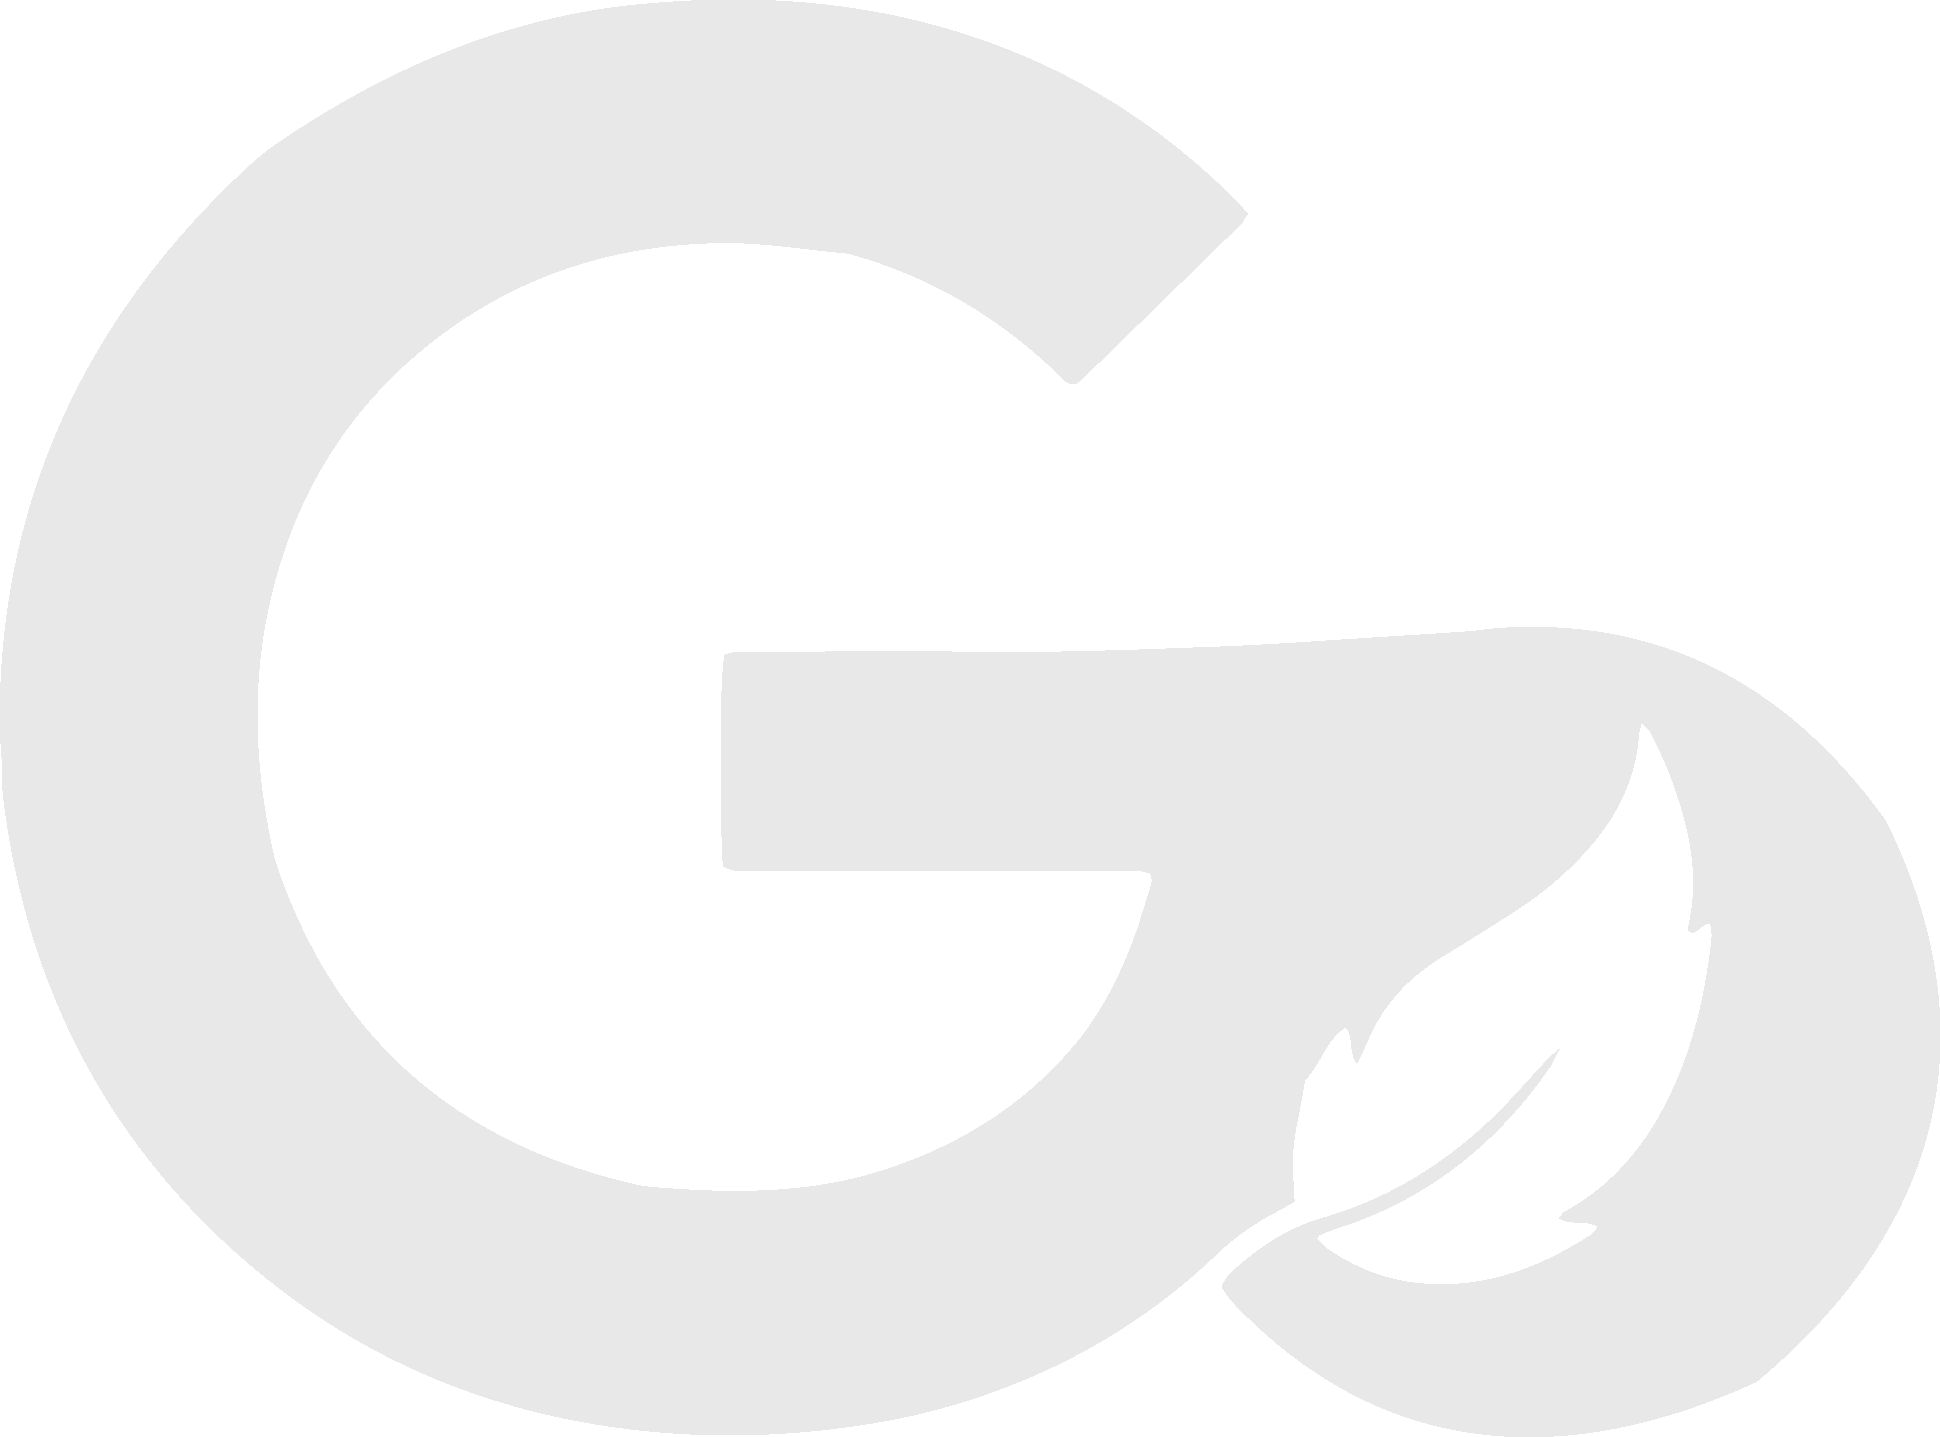 agence go easy, goeasy, go easy, g easy, geasy, communication, marketing, référencement, SEO, google, visite virtuelle, google, streetview, trusted, business trusted